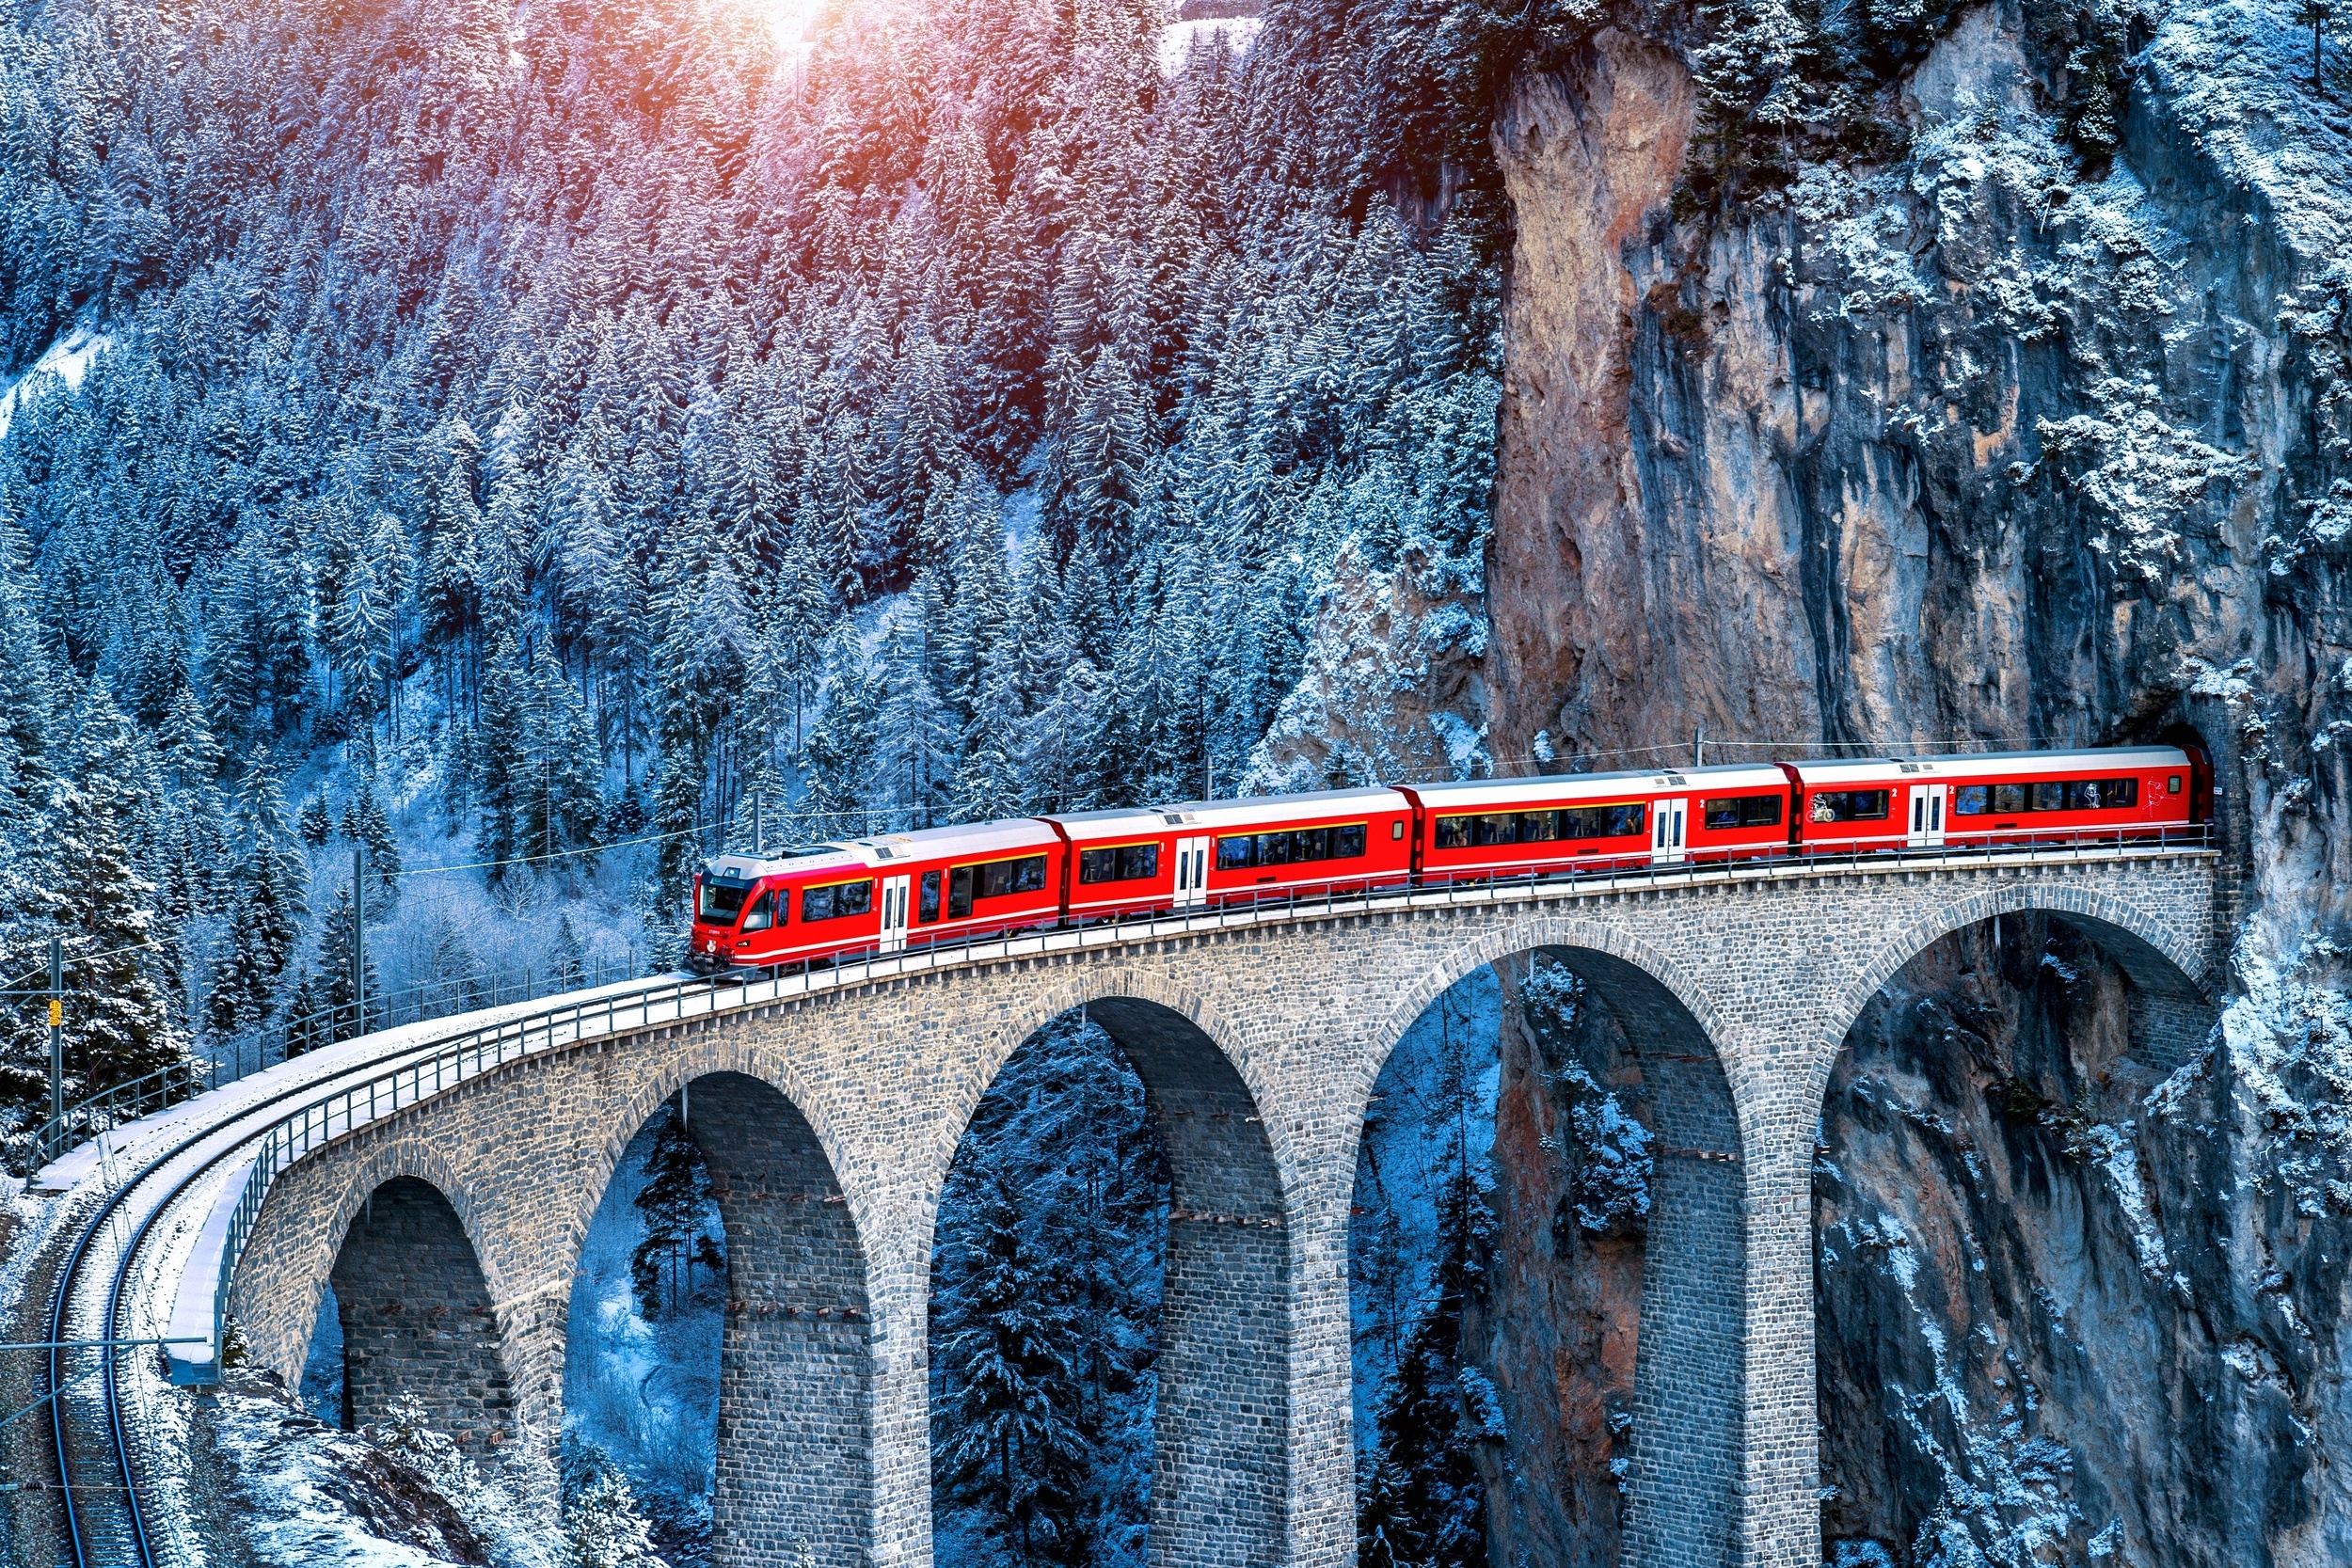 <p>For tourists, Europe is synonymous with train travel, and there is truly no better way to explore the continent. All the options make it difficult to choose one — or two, or even a few — for your transatlantic adventure. That’s why we’ve rounded up 15 of the most scenic train rides across the region!</p>